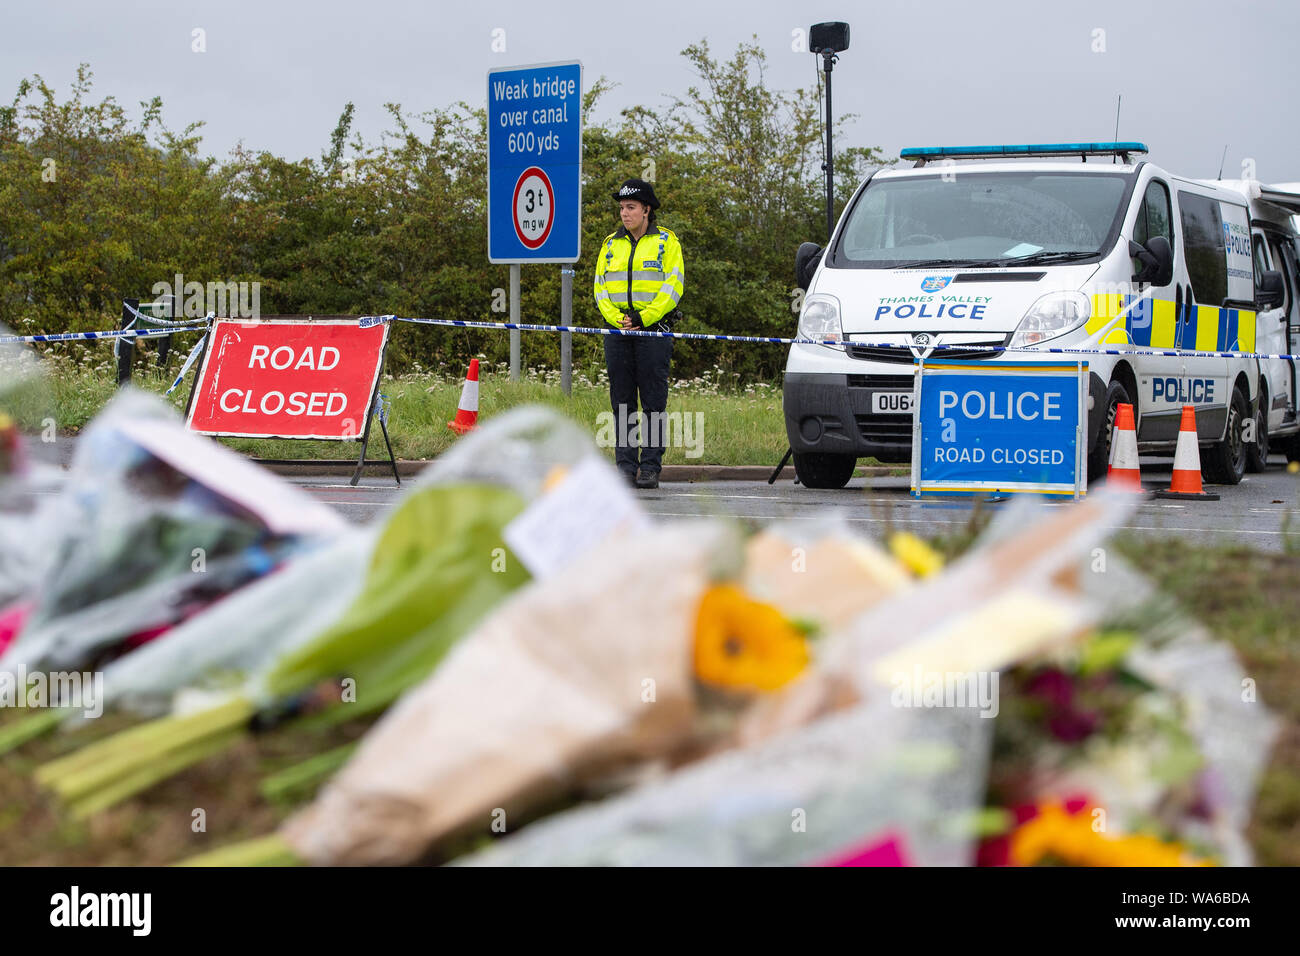 Police at the scene where Thames Valley Police officer Pc Andrew Harper, 28, died following a 'serious incident' at about 11.30pm on Thursday near the A4 Bath Road, between Reading and Newbury, at the village of Sulhamstead in Berkshire. Stock Photo